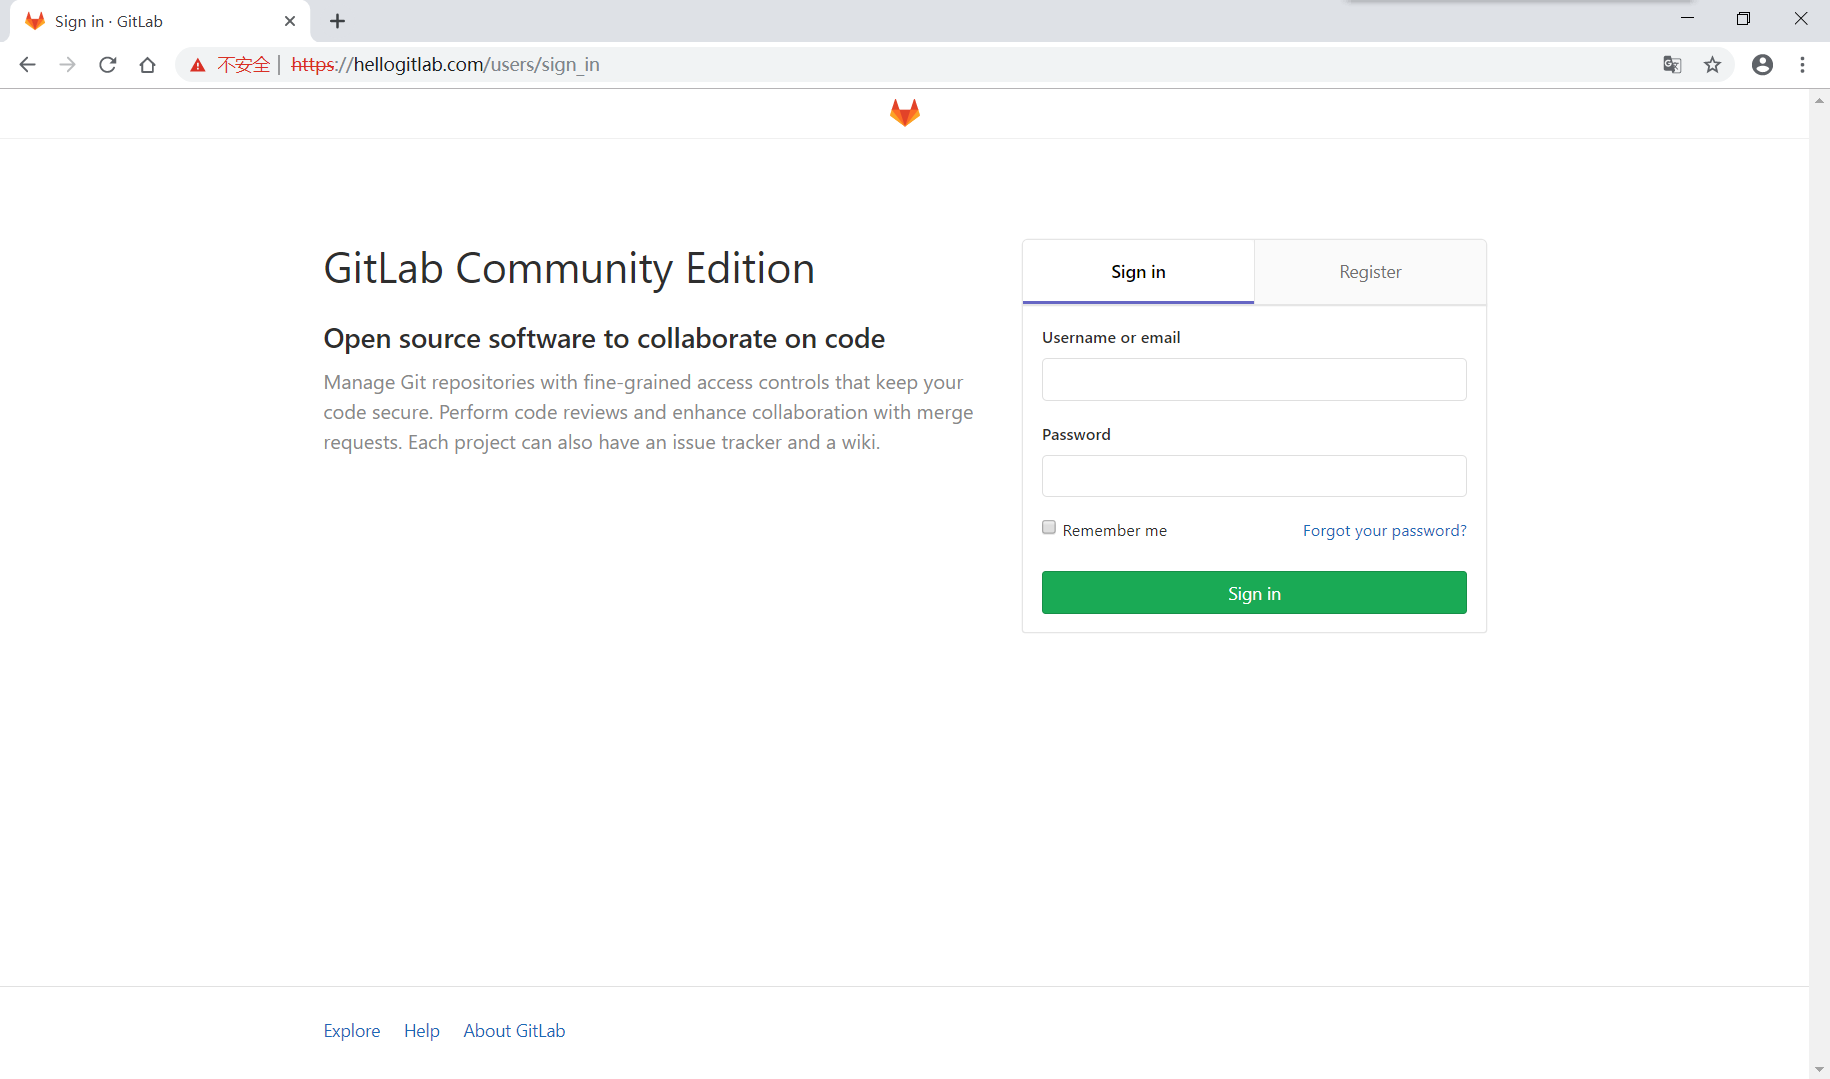 _images/gitlab_domain_https_page.png